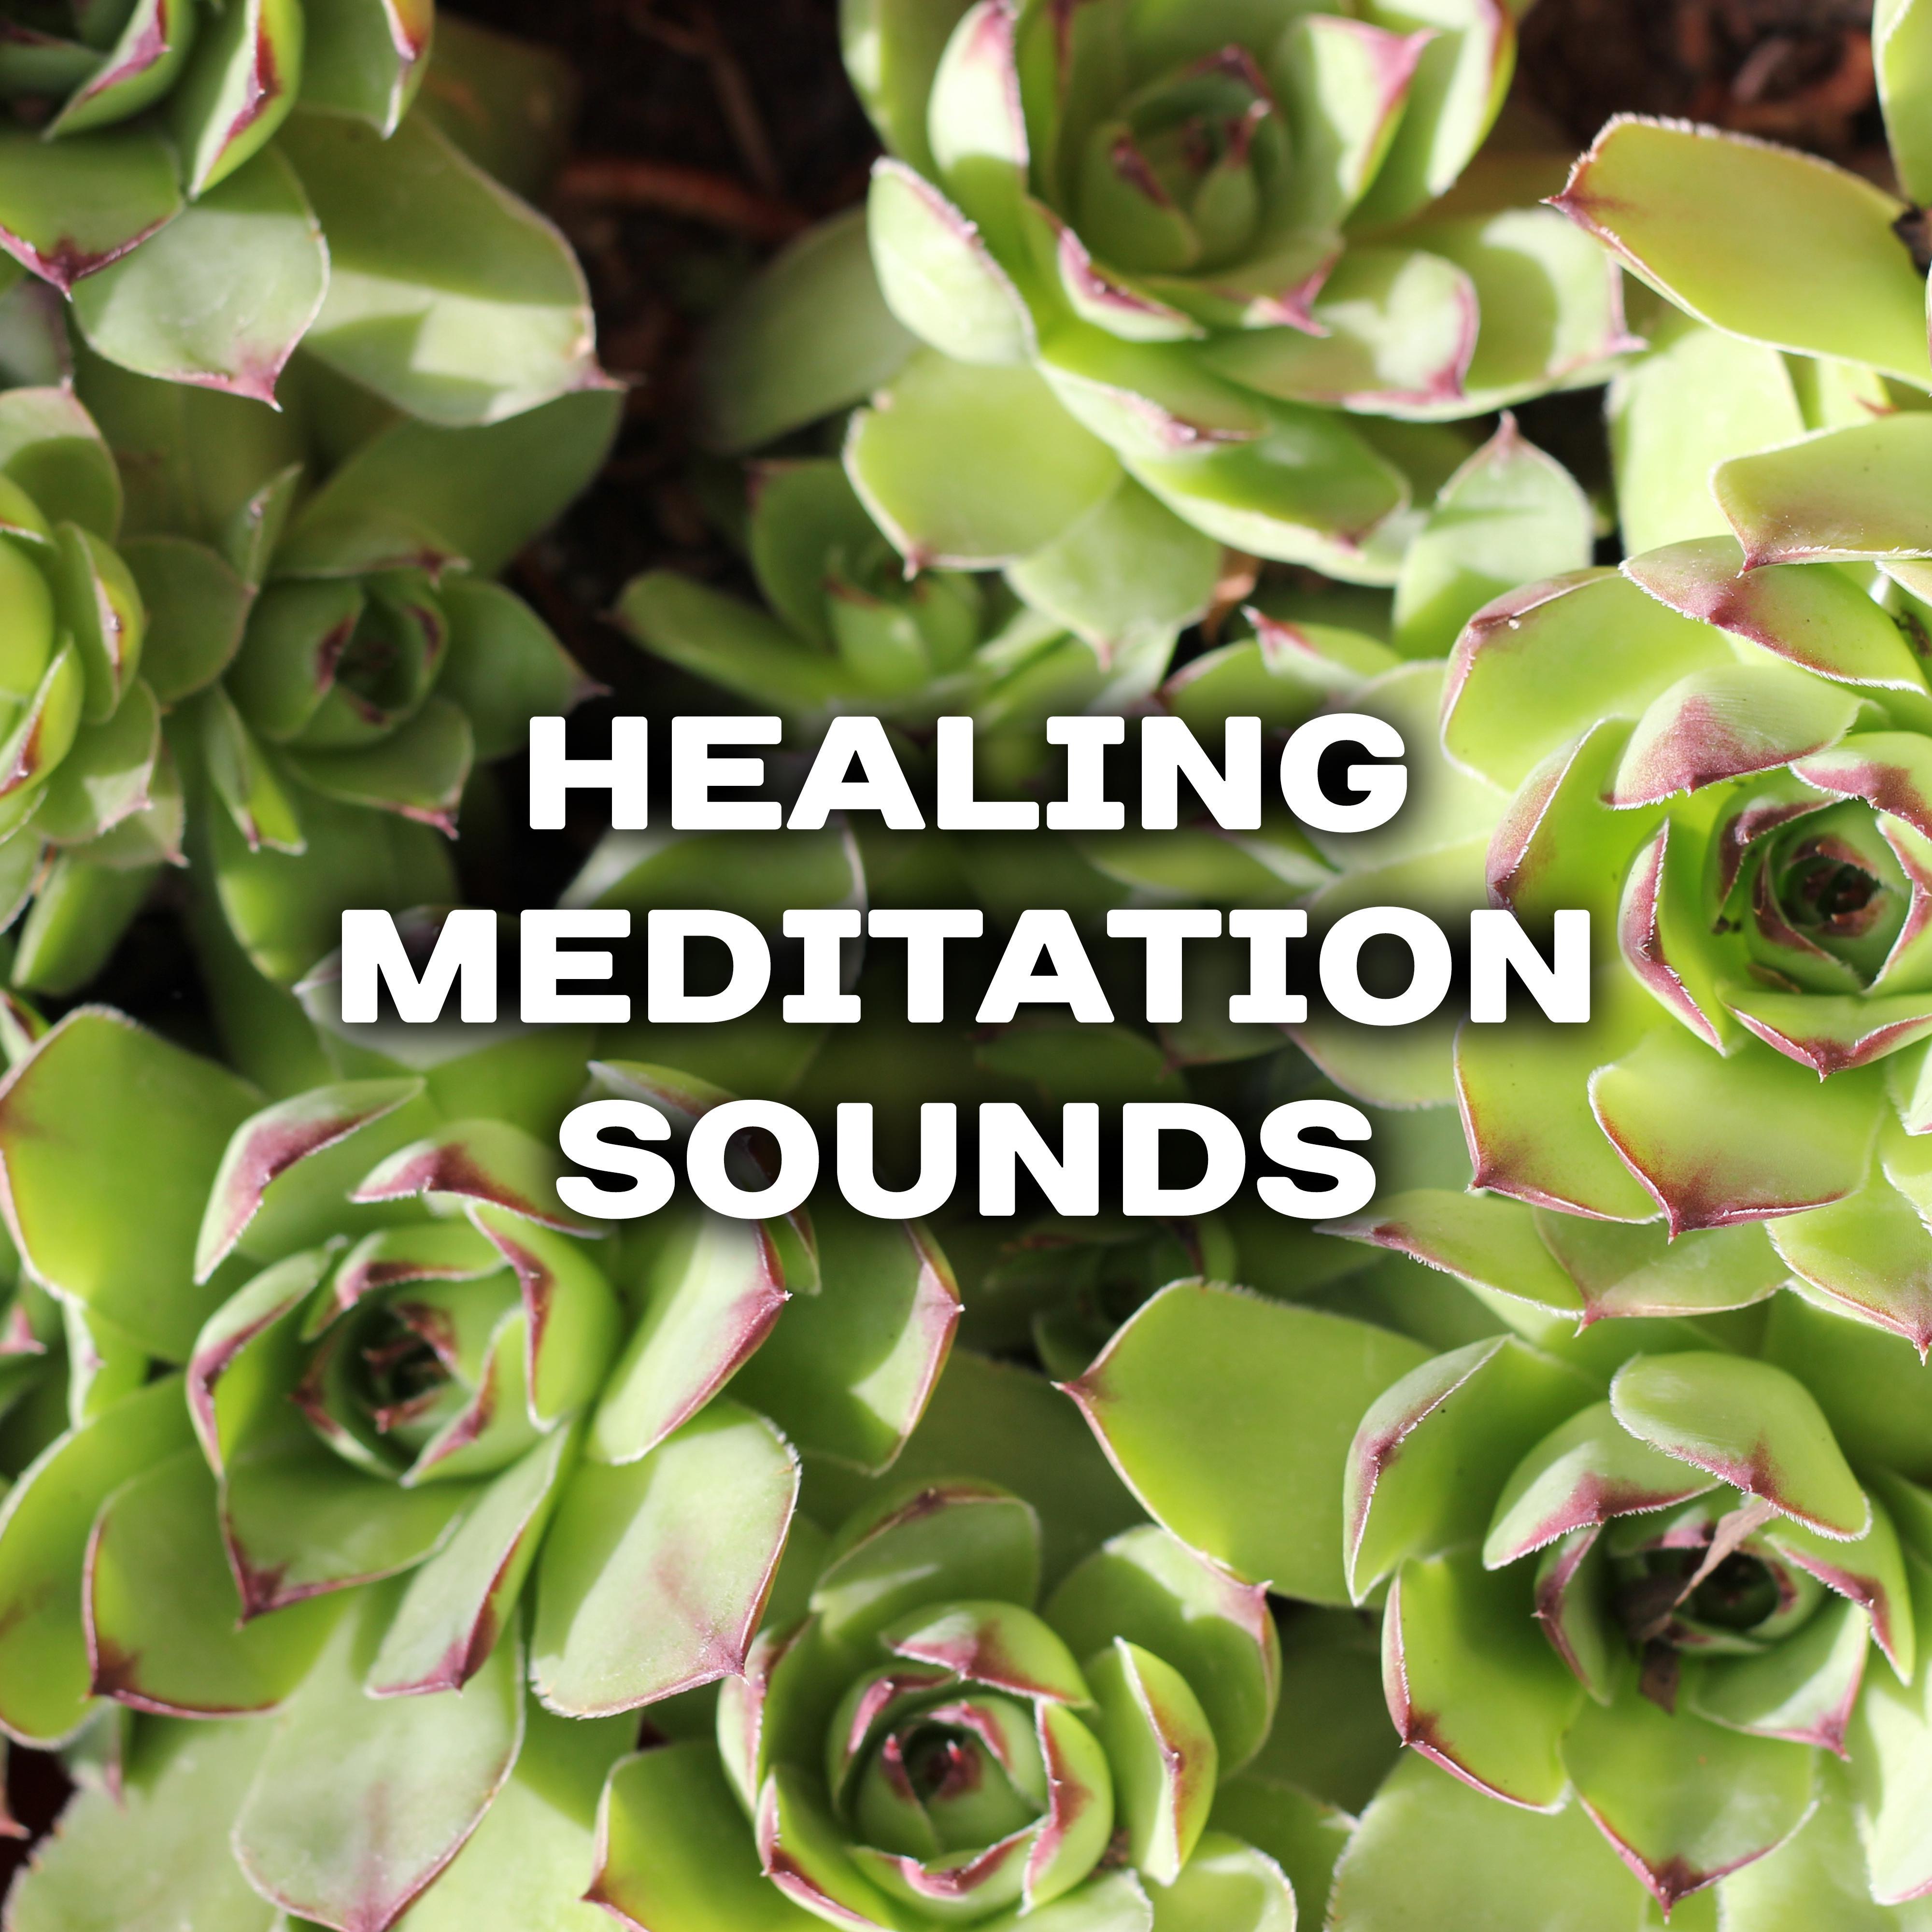 Healing Meditation Sounds  Rest with New Age Music, Buddha Relaxation, Meditate to Calm Mind  Body